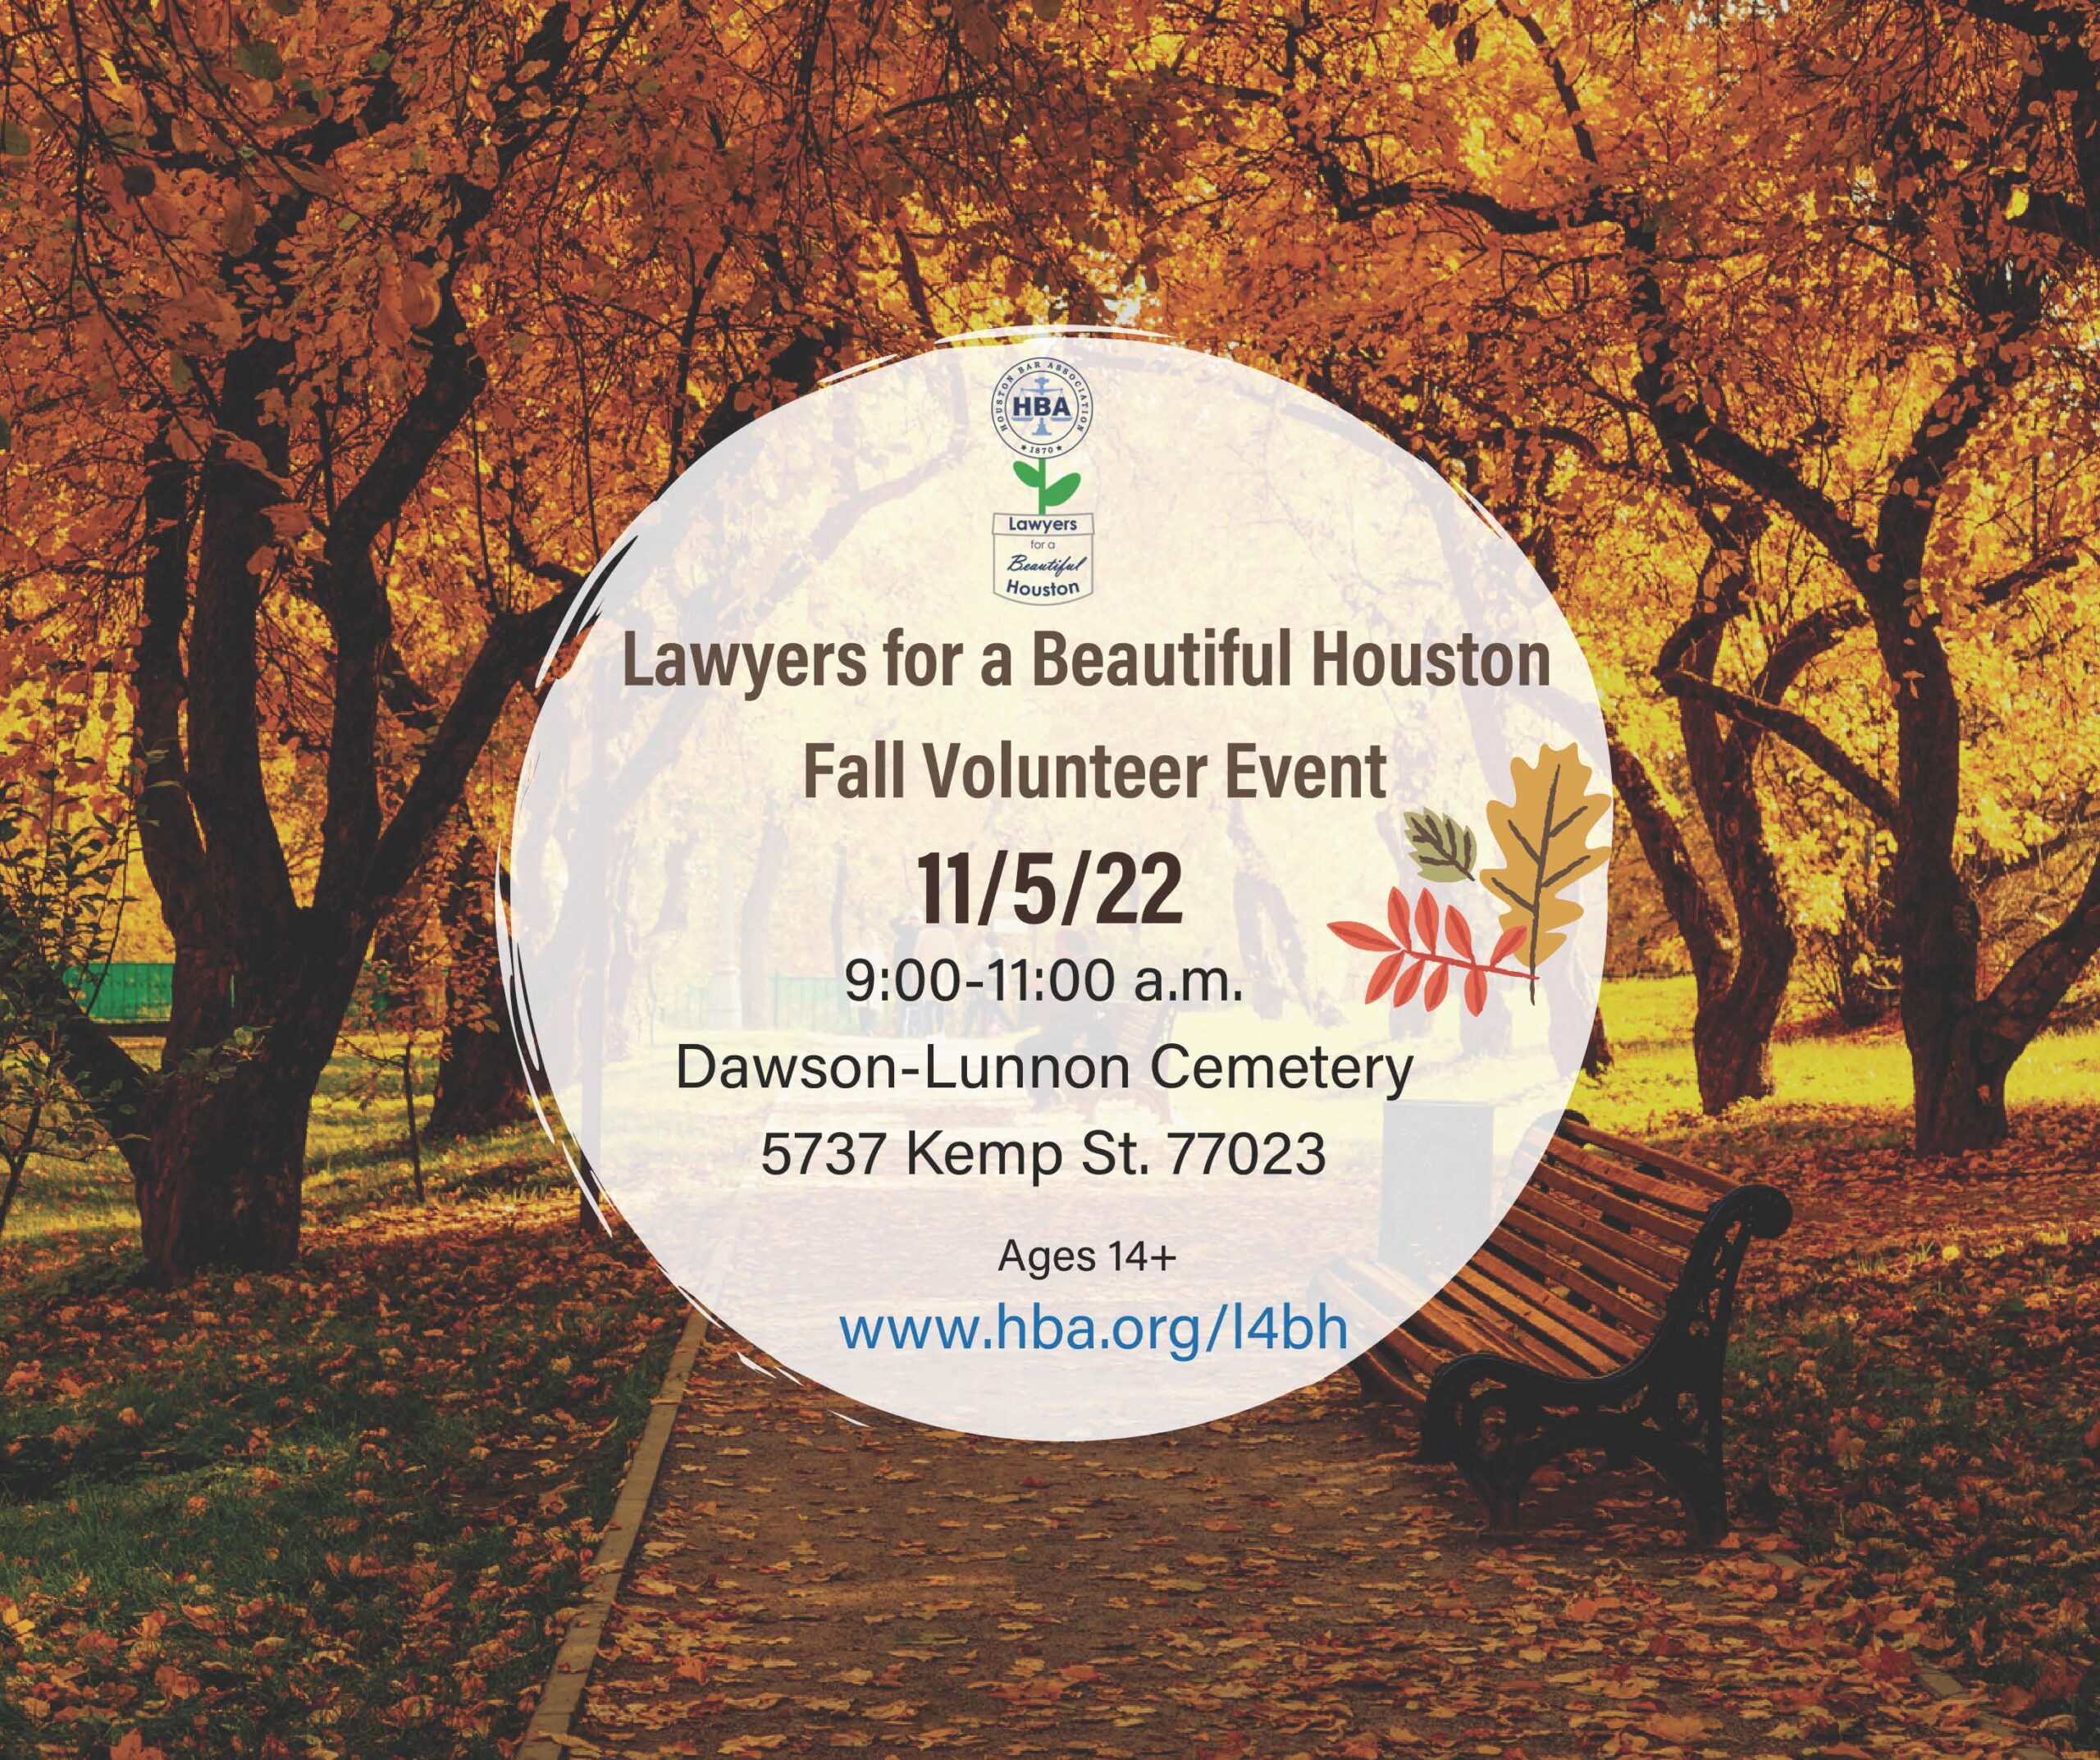 Lawyers for a Beautiful Houston 2022 Fall Volunteer Event